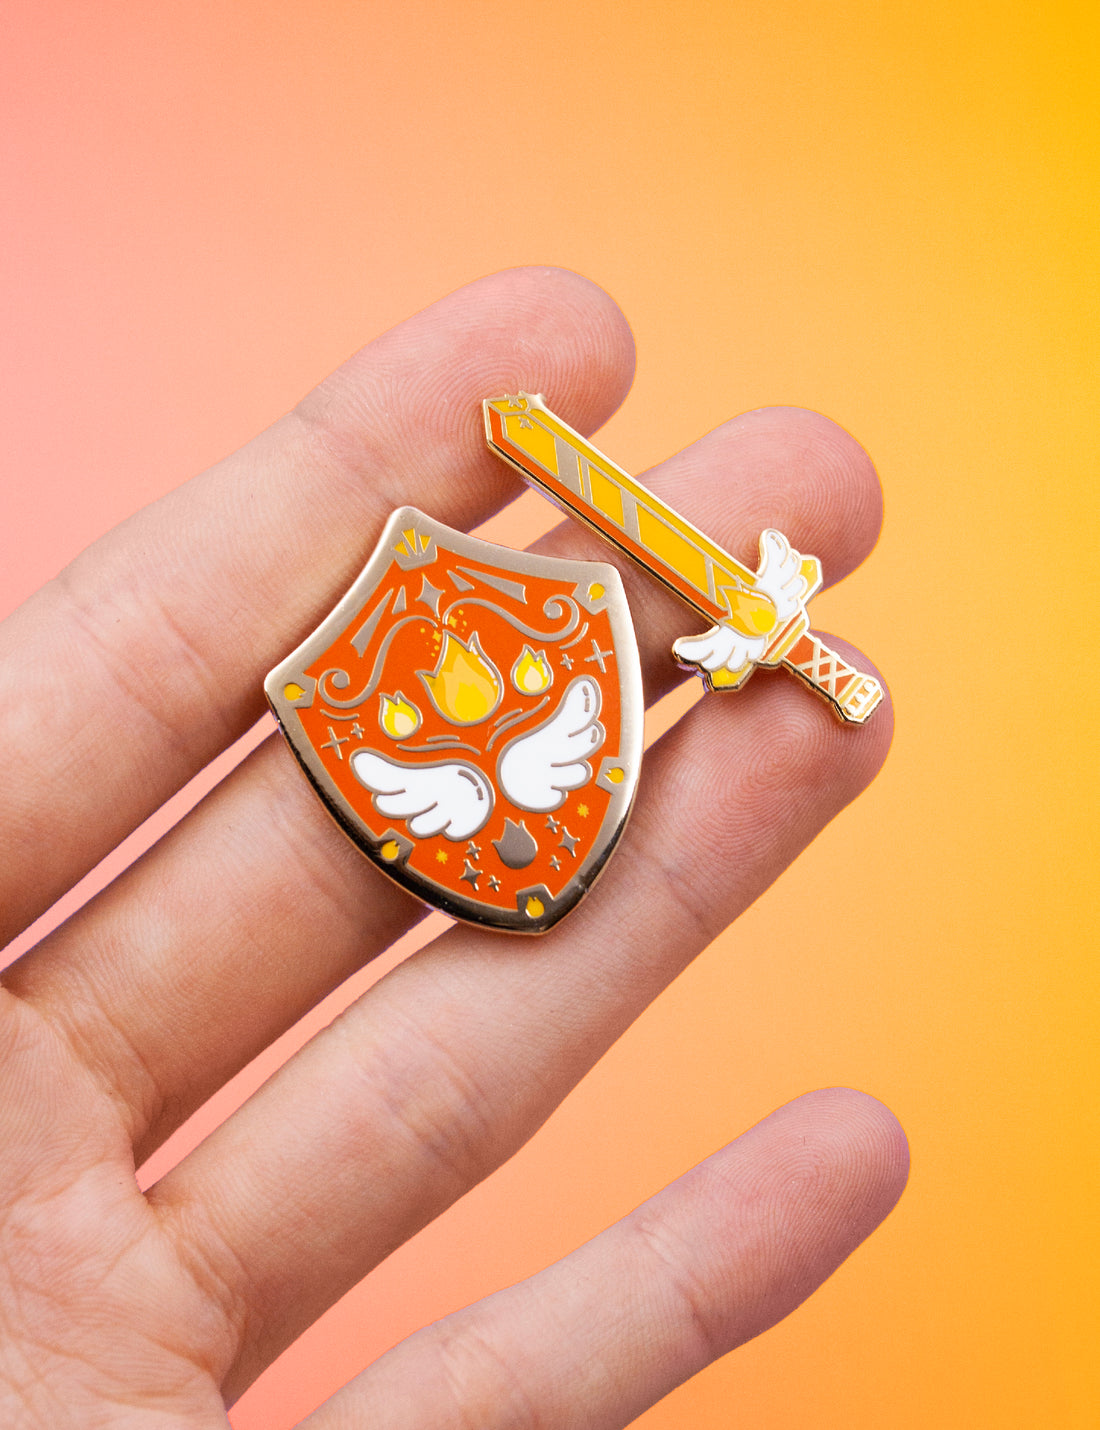 Fire scout PINS ❤ LIMITED EDITION